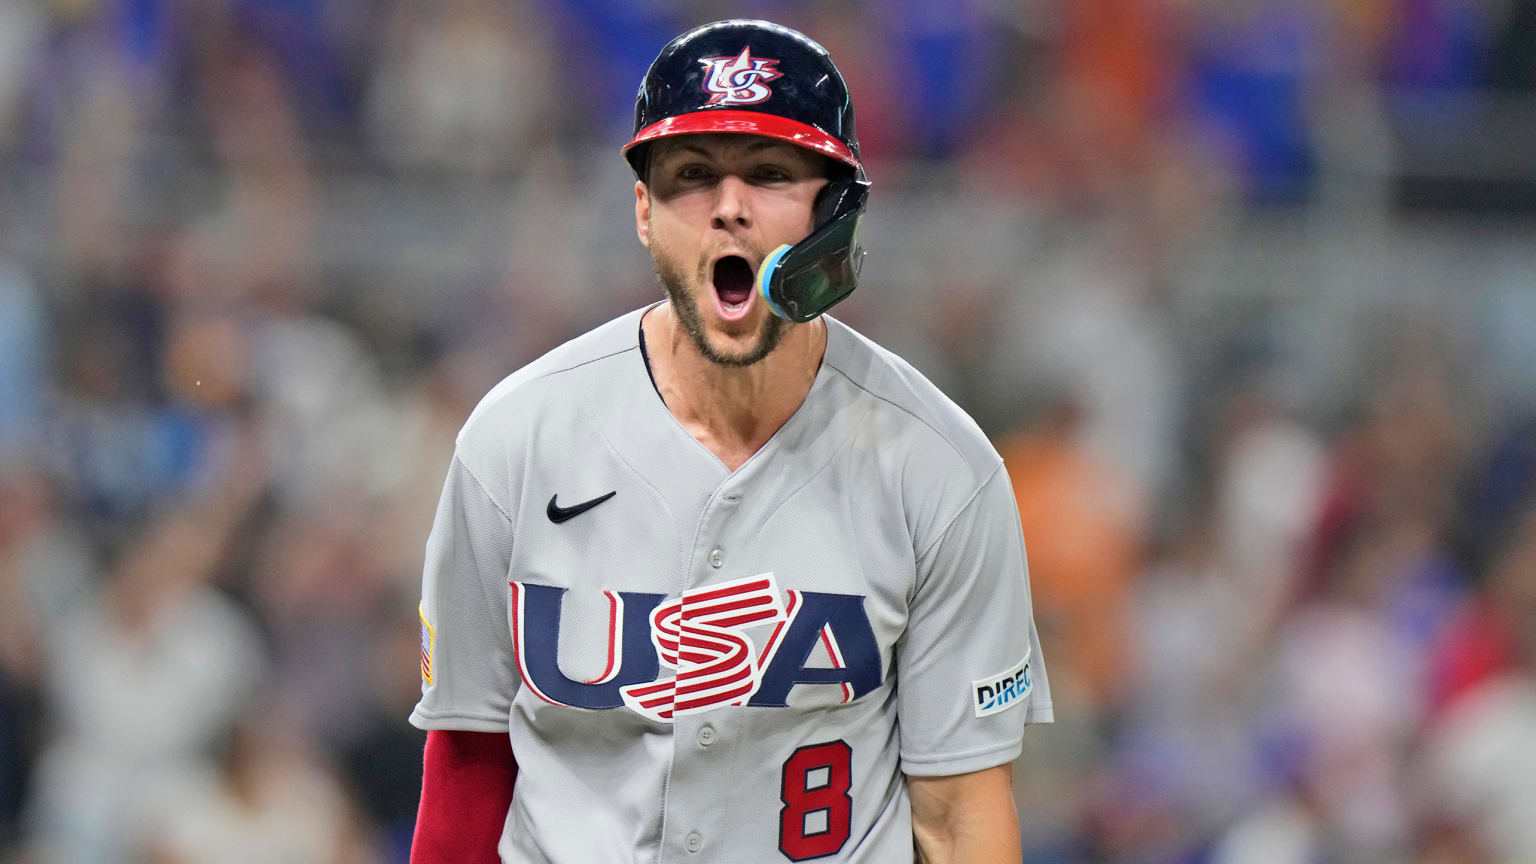 Trea Turner shouts with excitement in a Team USA uniform